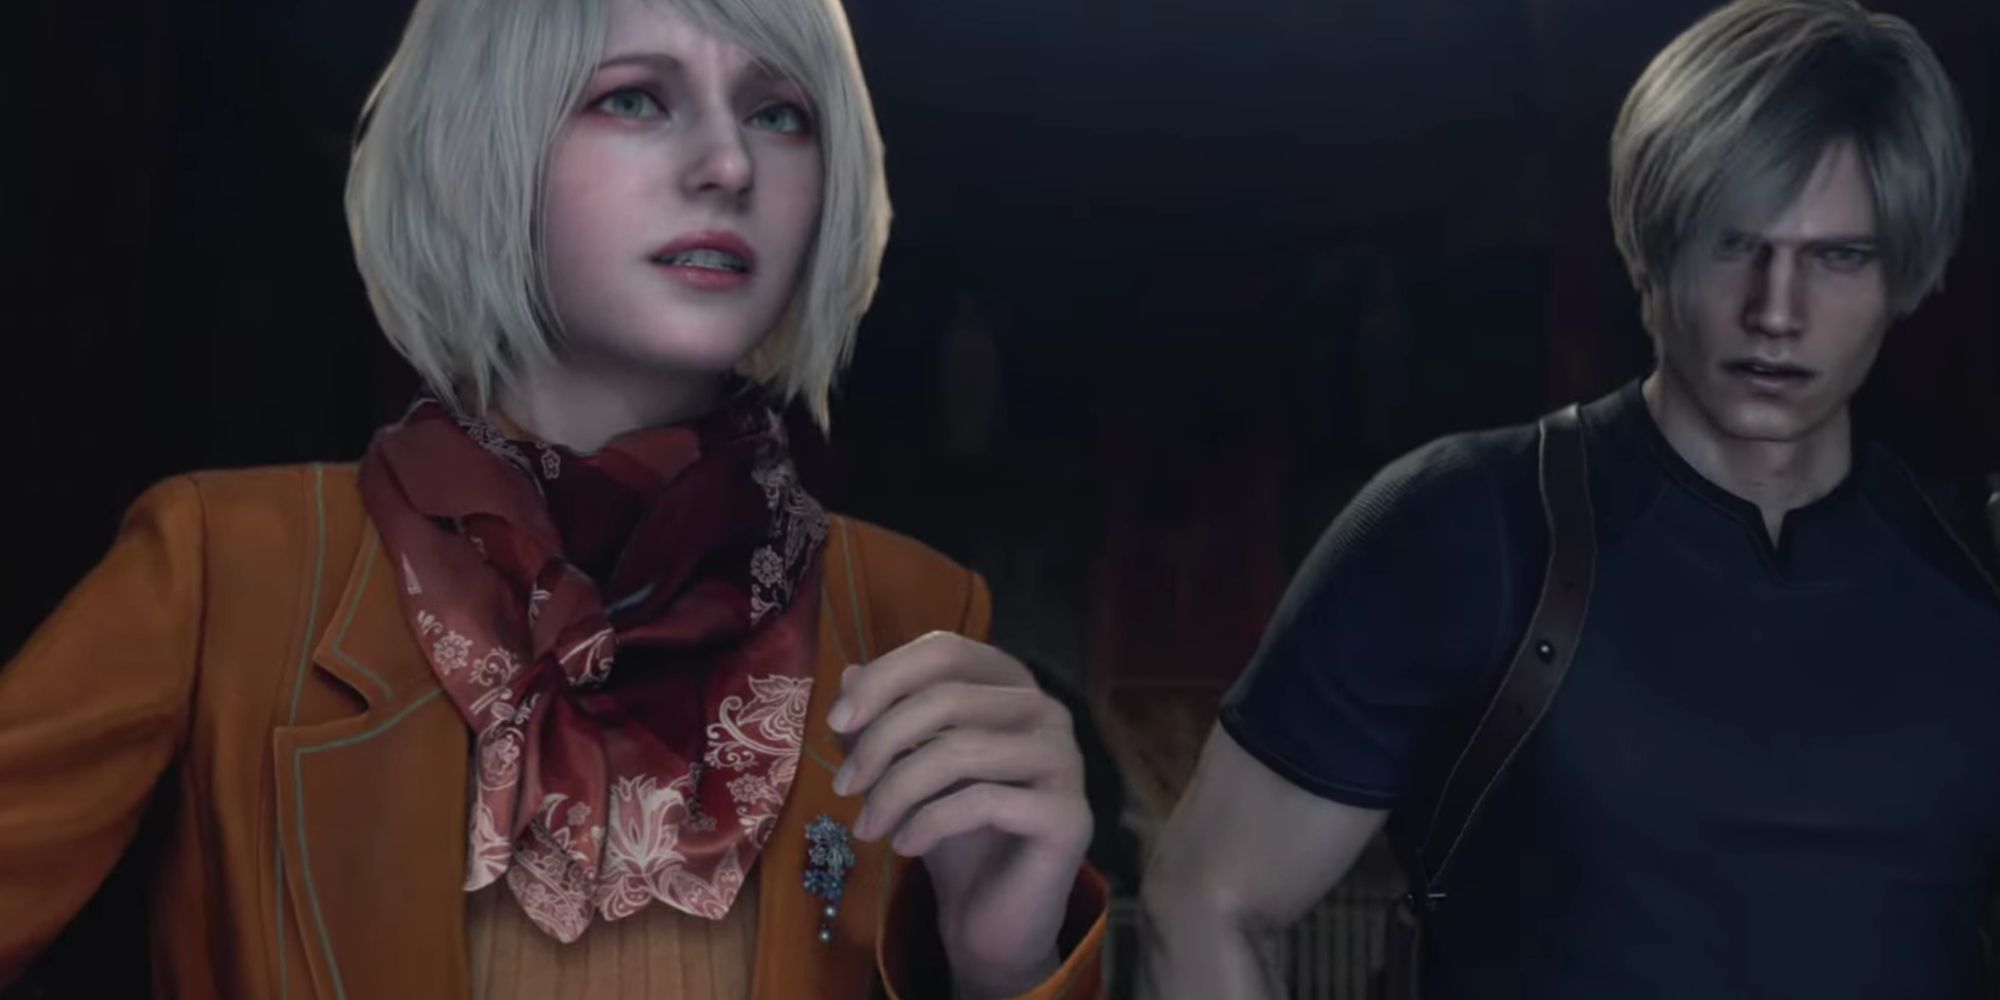 Leon and Ashley peering out of the window pane to see Ganados heading their way with concerned expressions in Resident Evil 4.